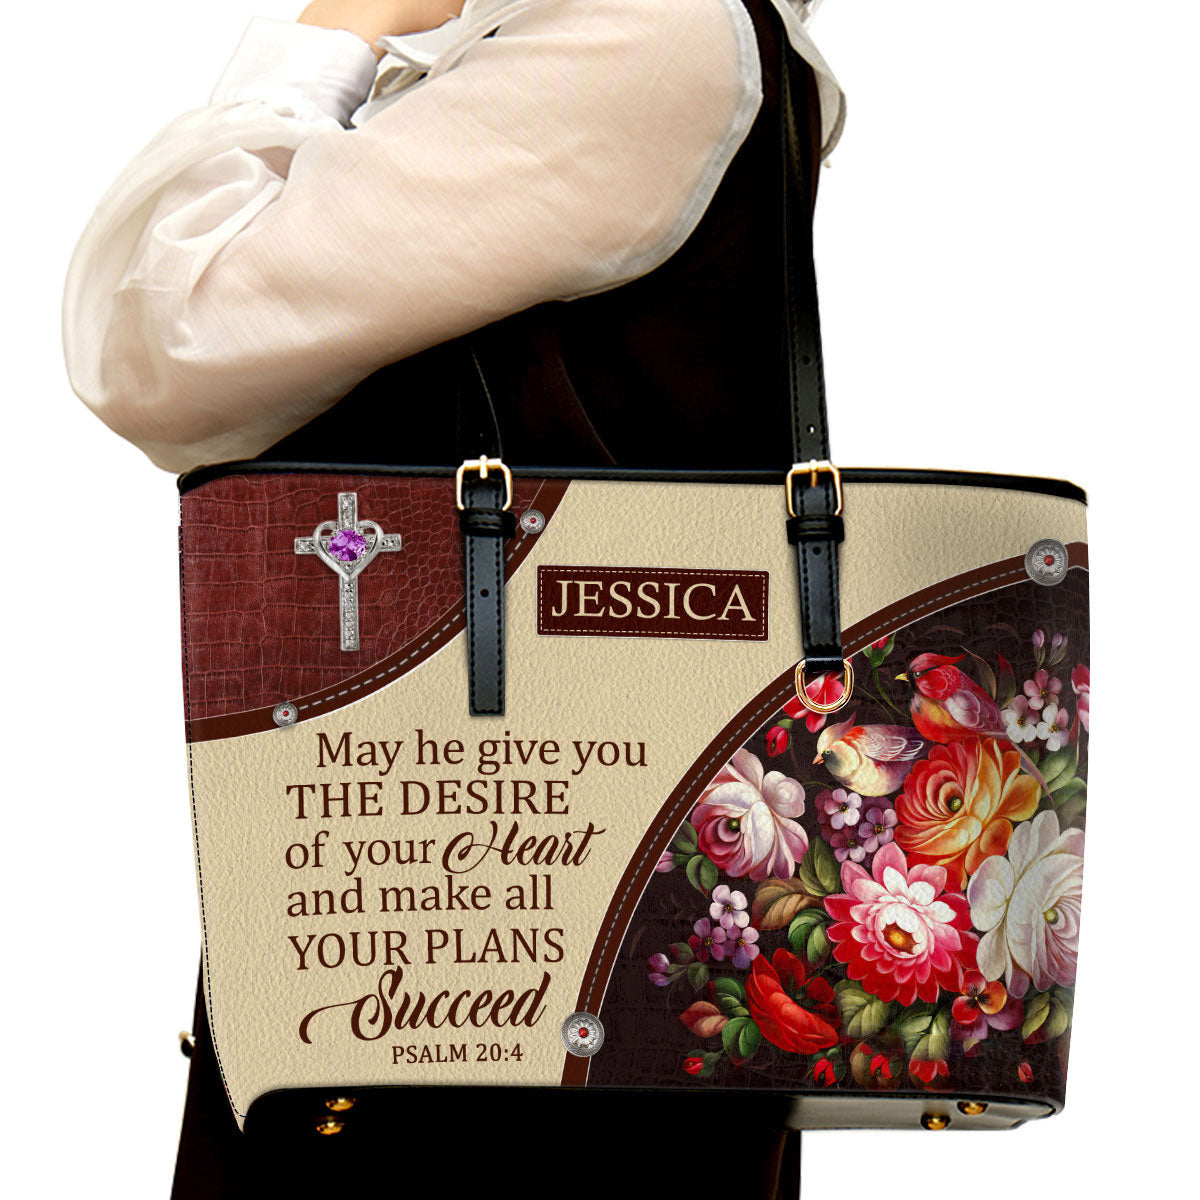 May He Make All Your Plans Succeed Personalized Pu Leather Tote Bag For Women - Mom Gifts For Mothers Day